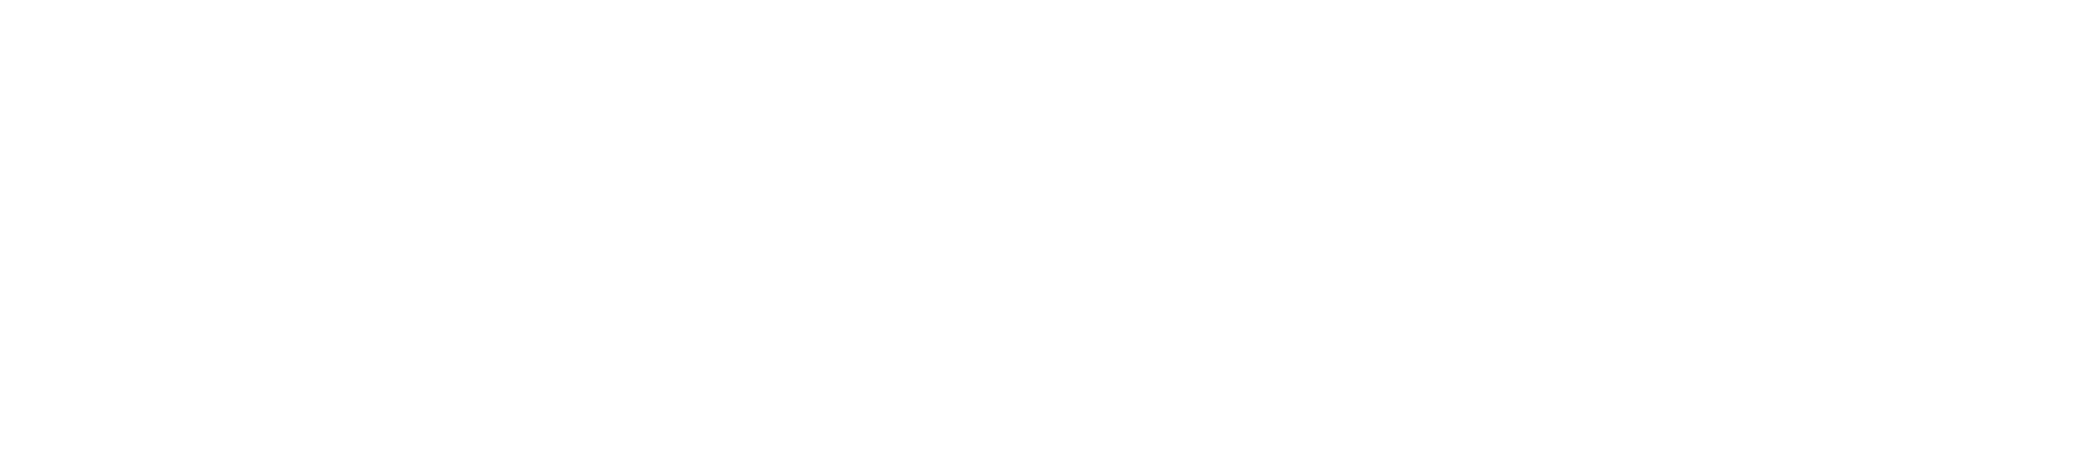 Positive Change Counselling